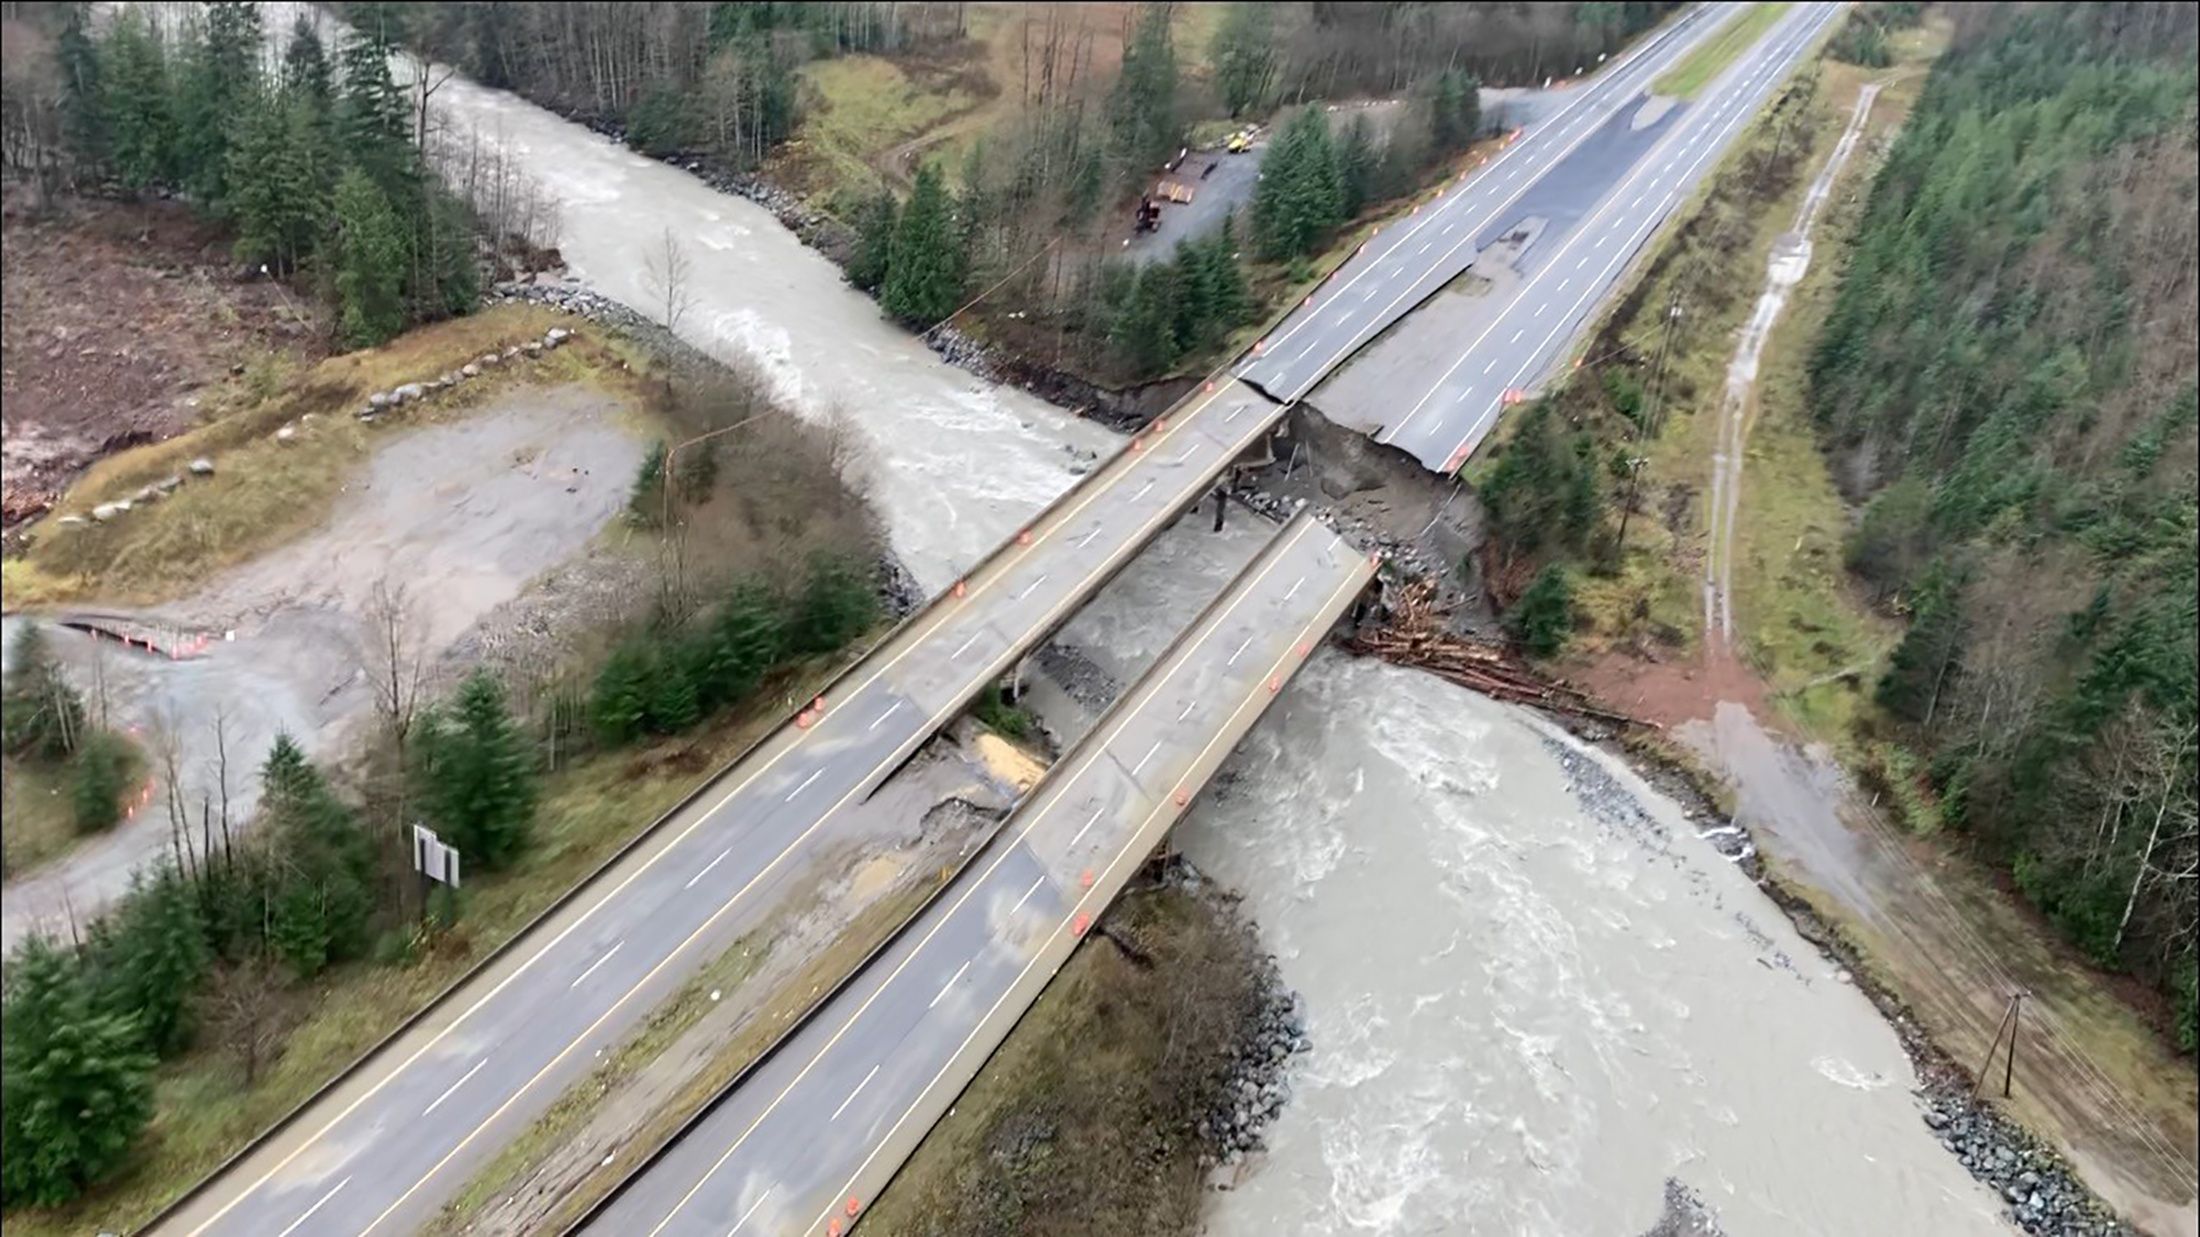 Highway 5 from Coquihalla is cut off at Sowaqua Creek after devastating rain storms caused flooding and landslides, northeast of Hope, British Columbia, Canada.  (Photo: Ministry of Transport and Infrastructure / REUTERS).